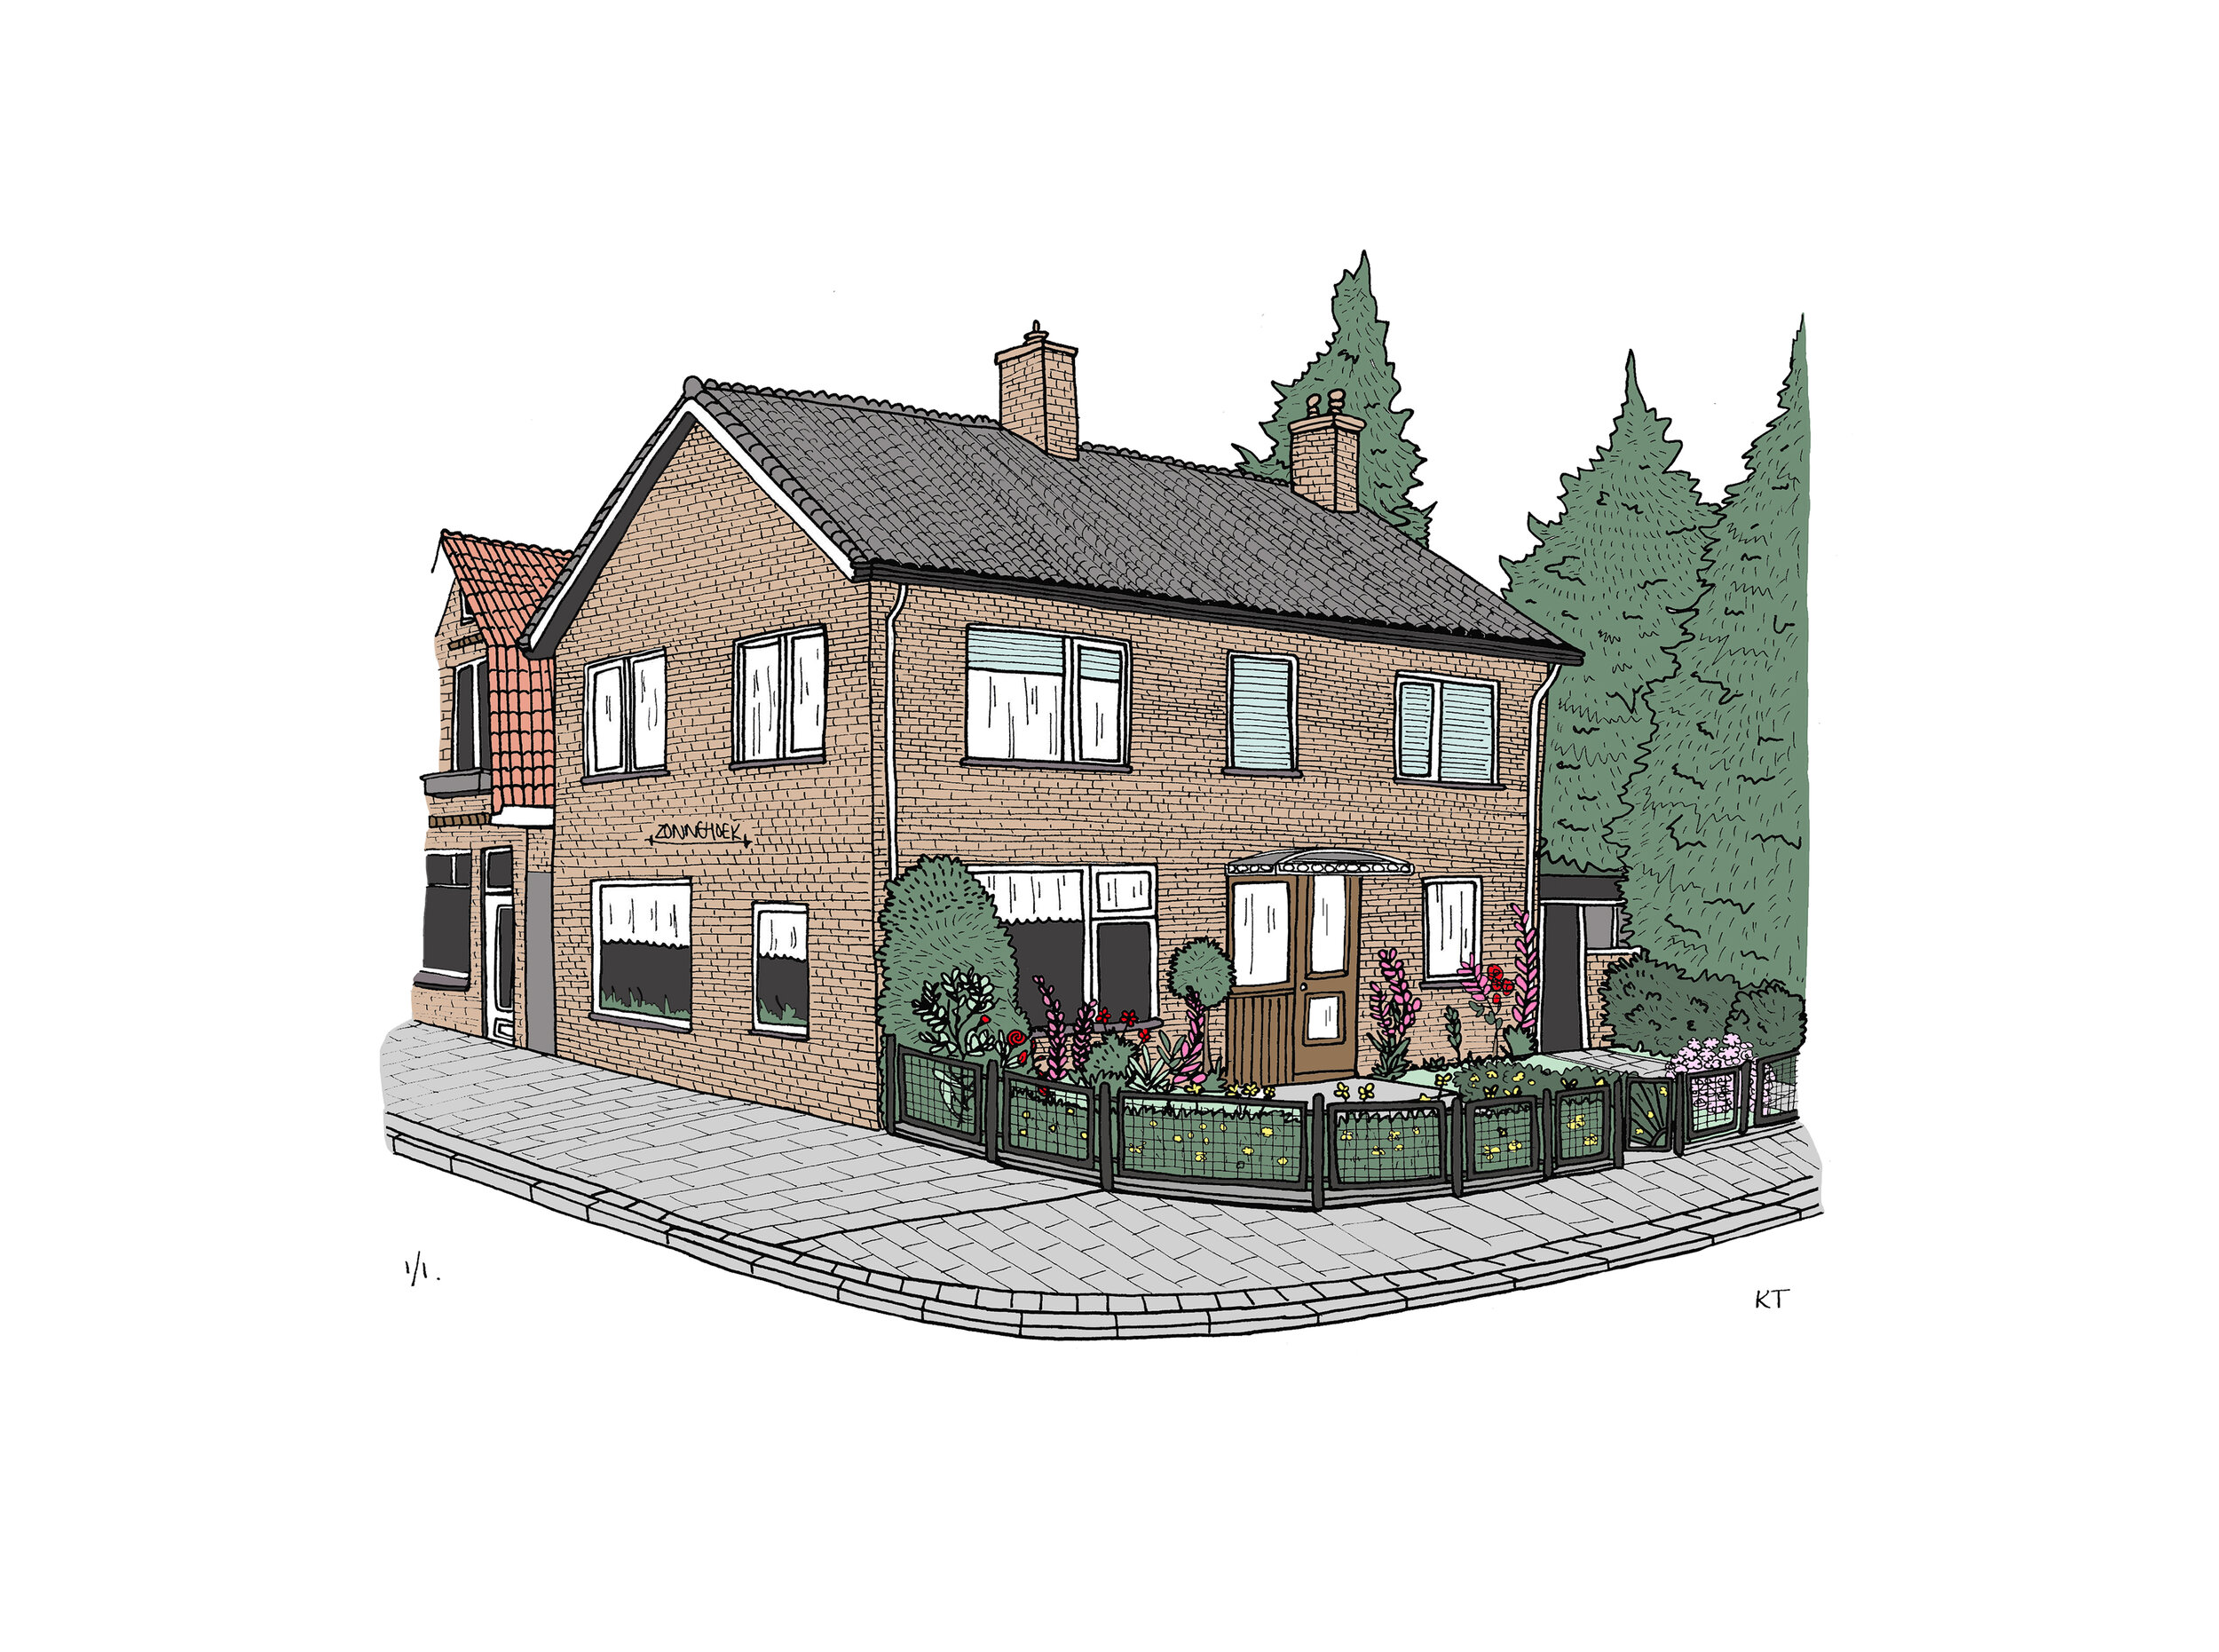 Commission of a House in Amsterdam